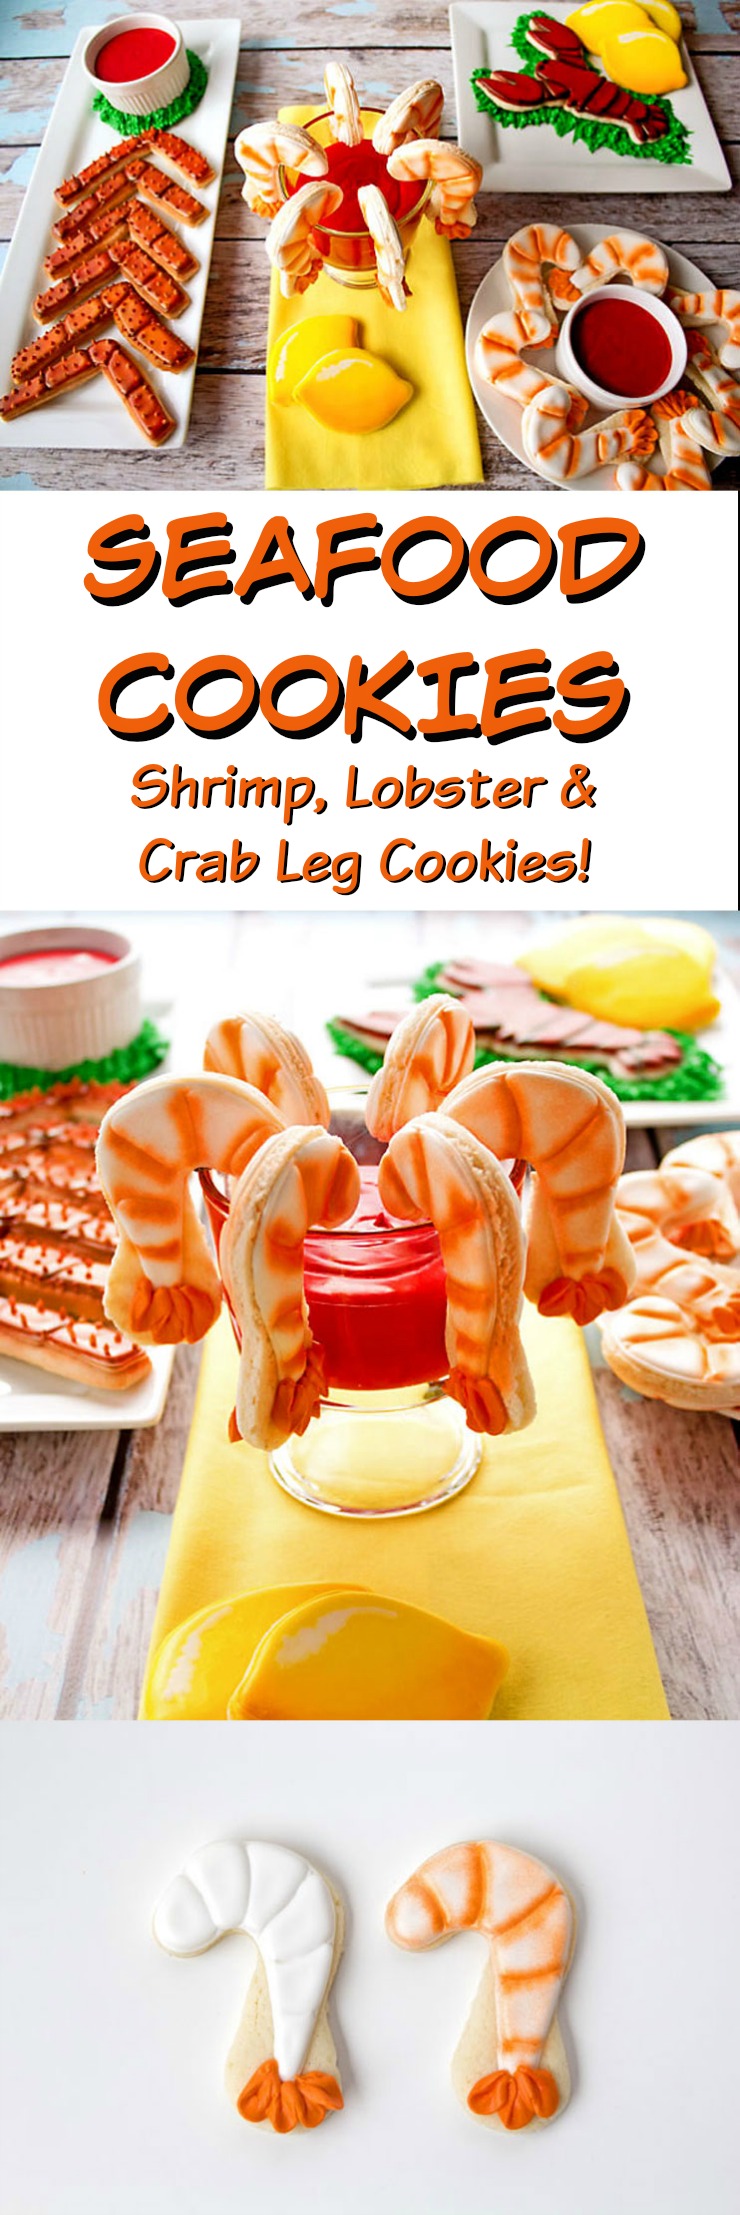 Seafood-Cookies-Yes-they-are-COOKIES-www.thebearfootbaker